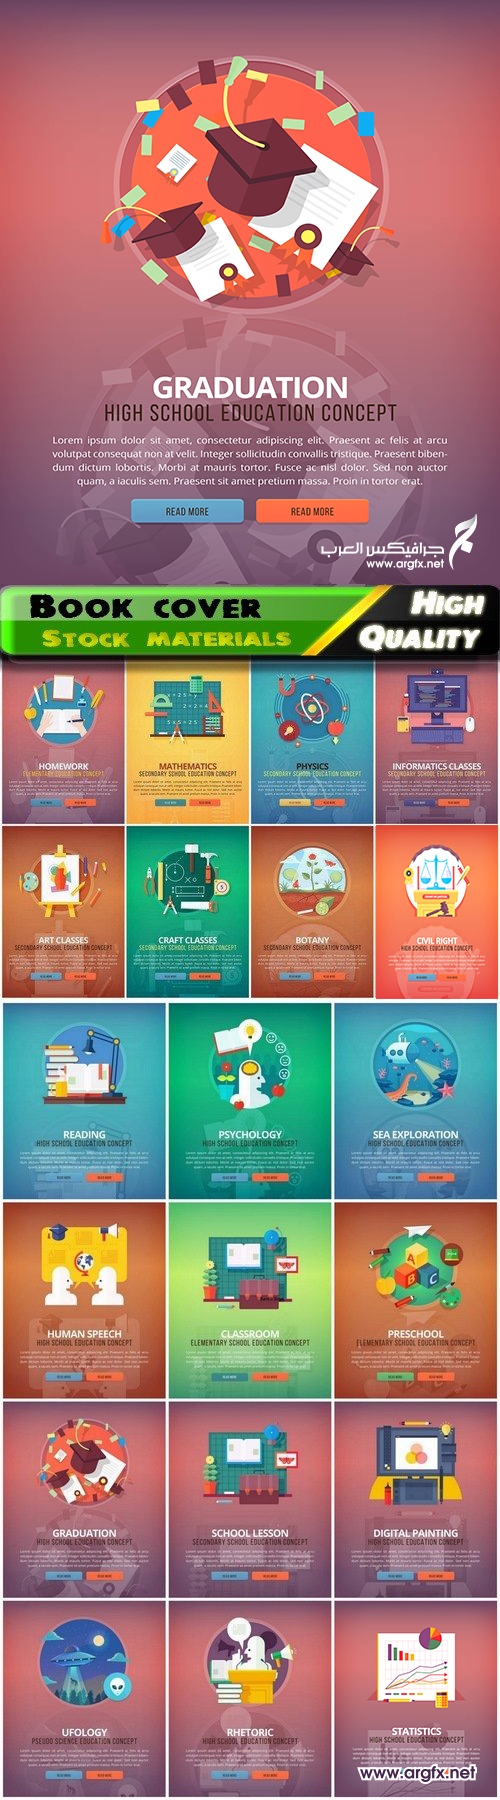  Educational book cover flat design with interesting themes 2 20 Eps